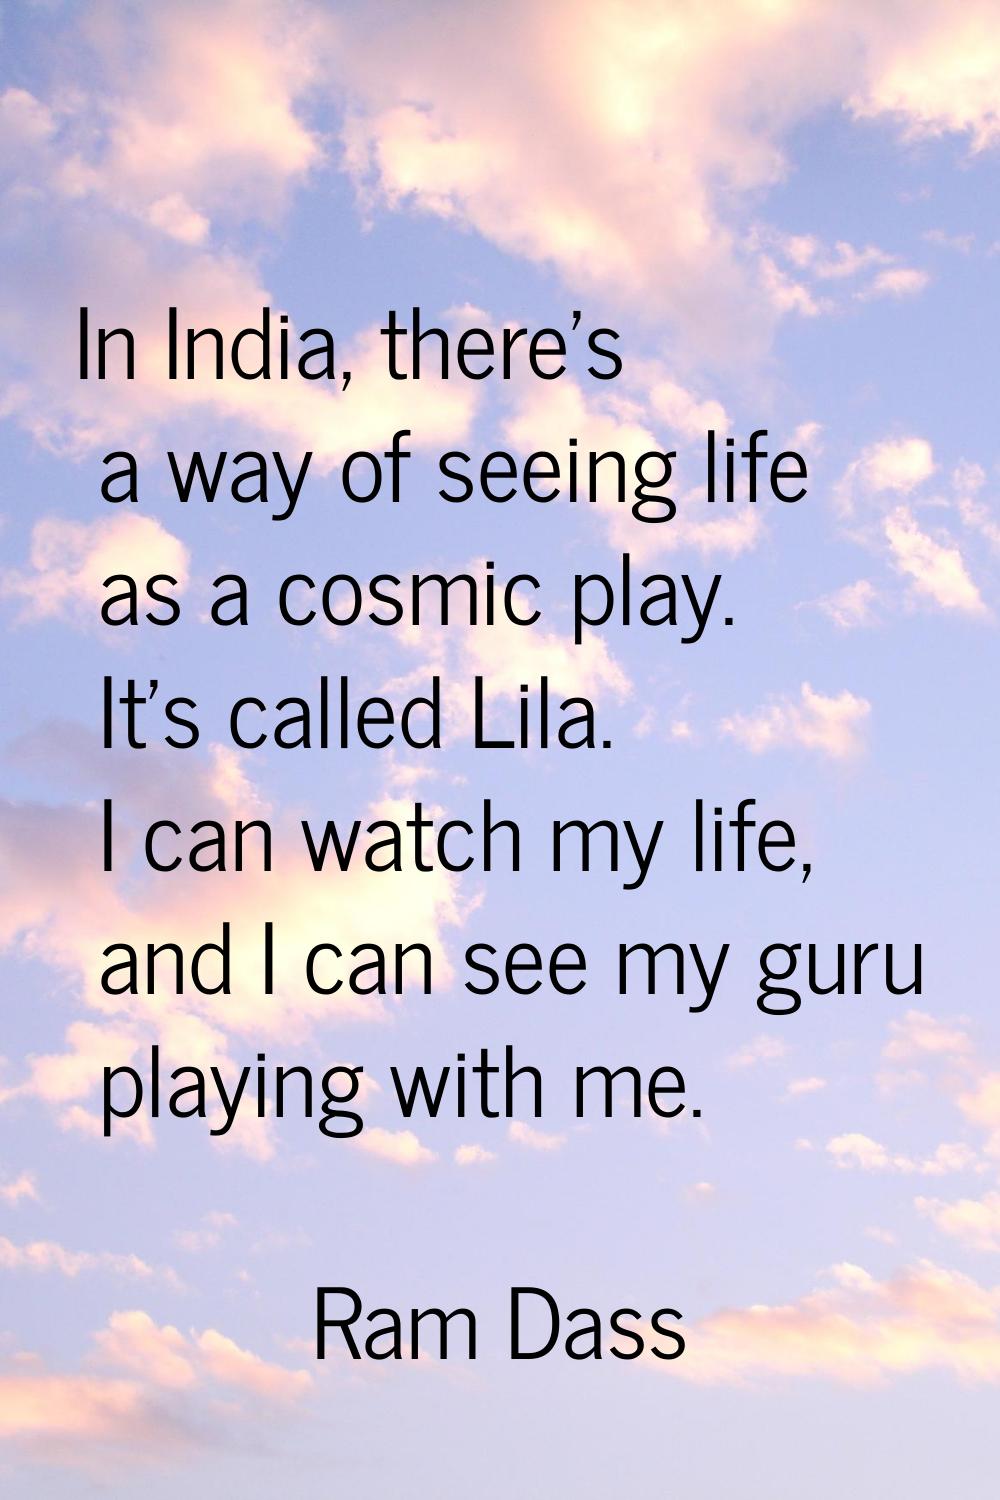 In India, there's a way of seeing life as a cosmic play. It's called Lila. I can watch my life, and